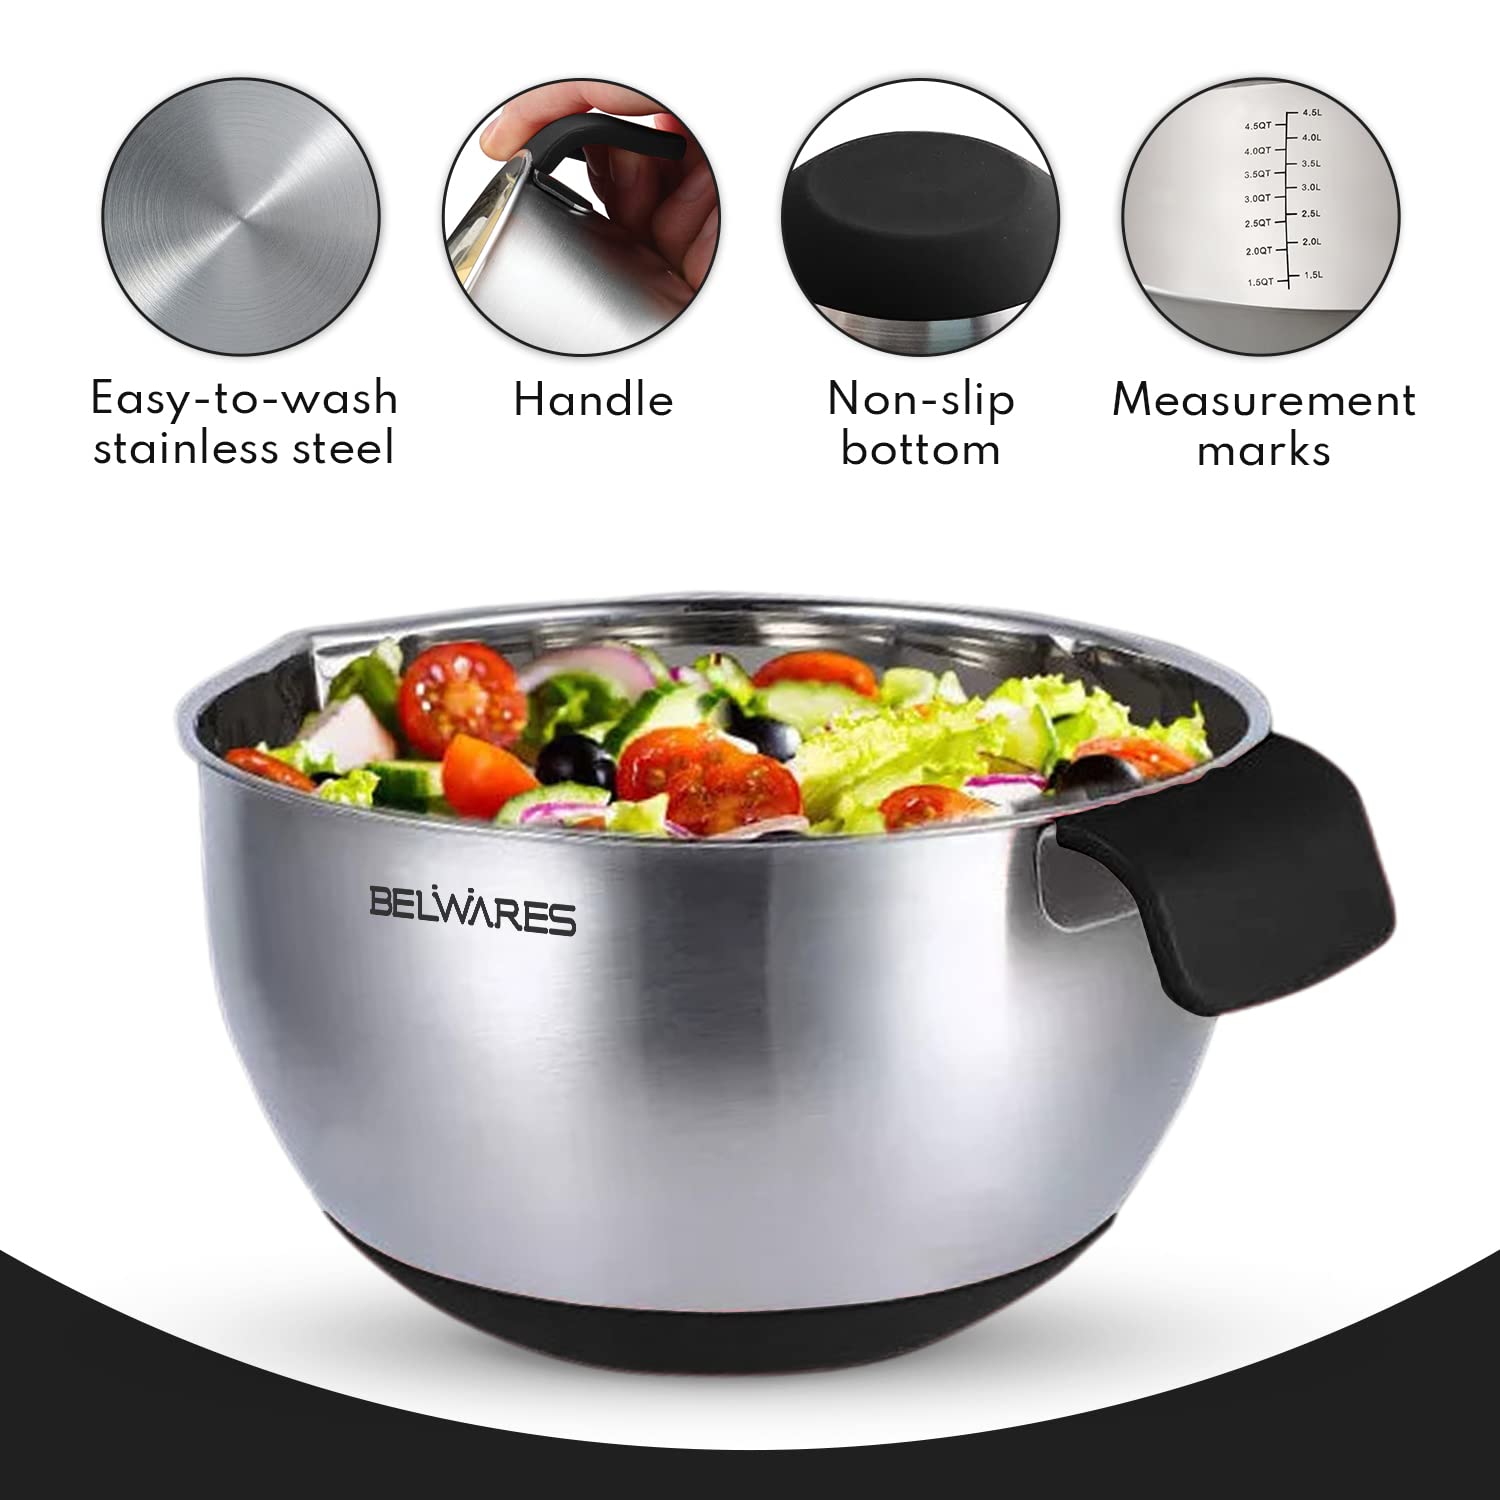 Belwares Mixing Bowls with Lids Set - Nesting Bowls with Graters, Handle, Pour Spout, Airtight Lids - Stainless Steel Non-Slip Mixing Bowl for Cooking, Baking, Prepping, Food Storage  - Good